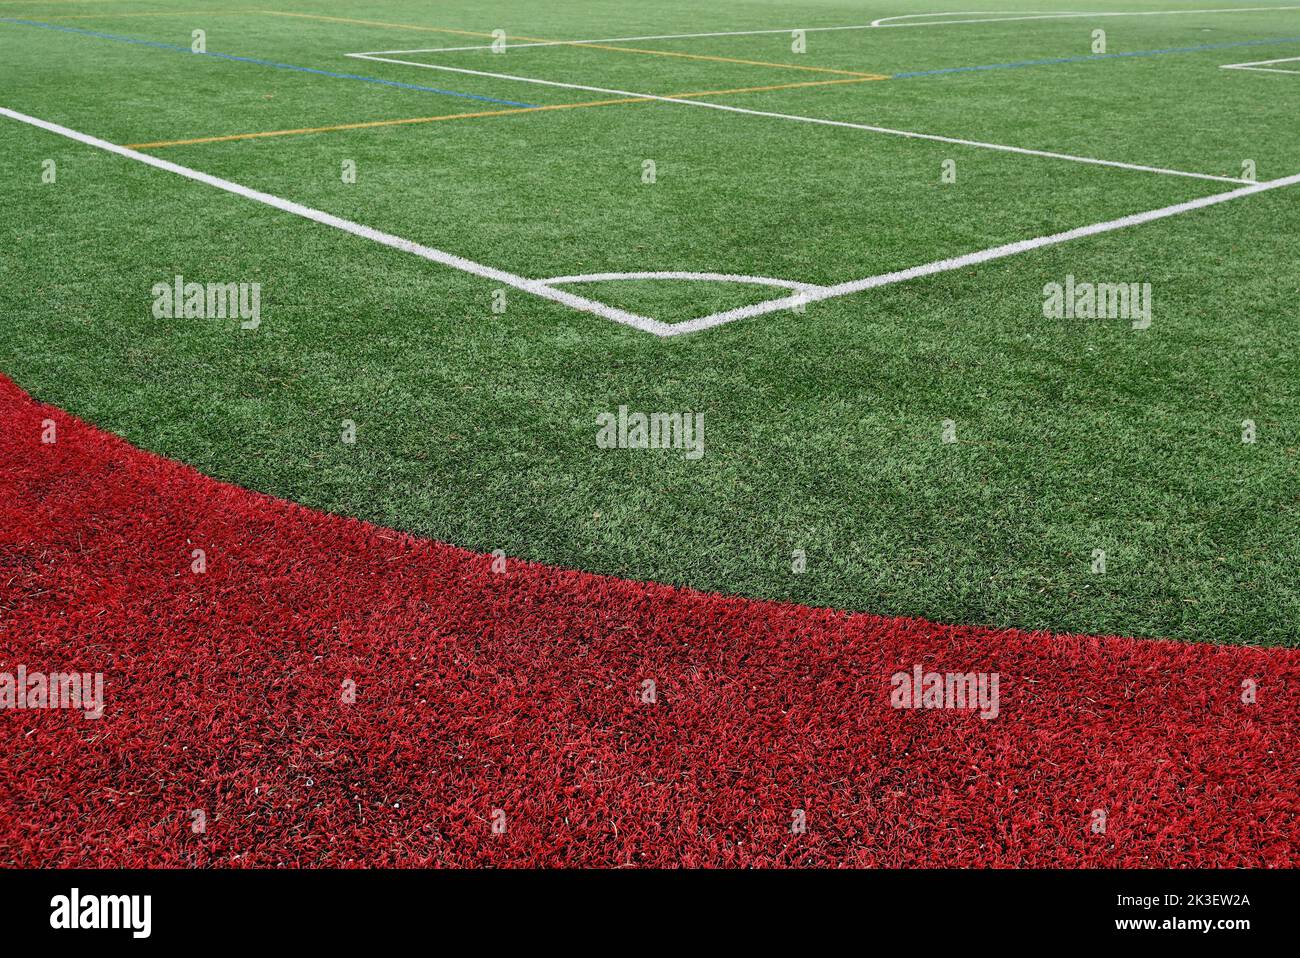 stadium field with artificial turf red and green Stock Photo